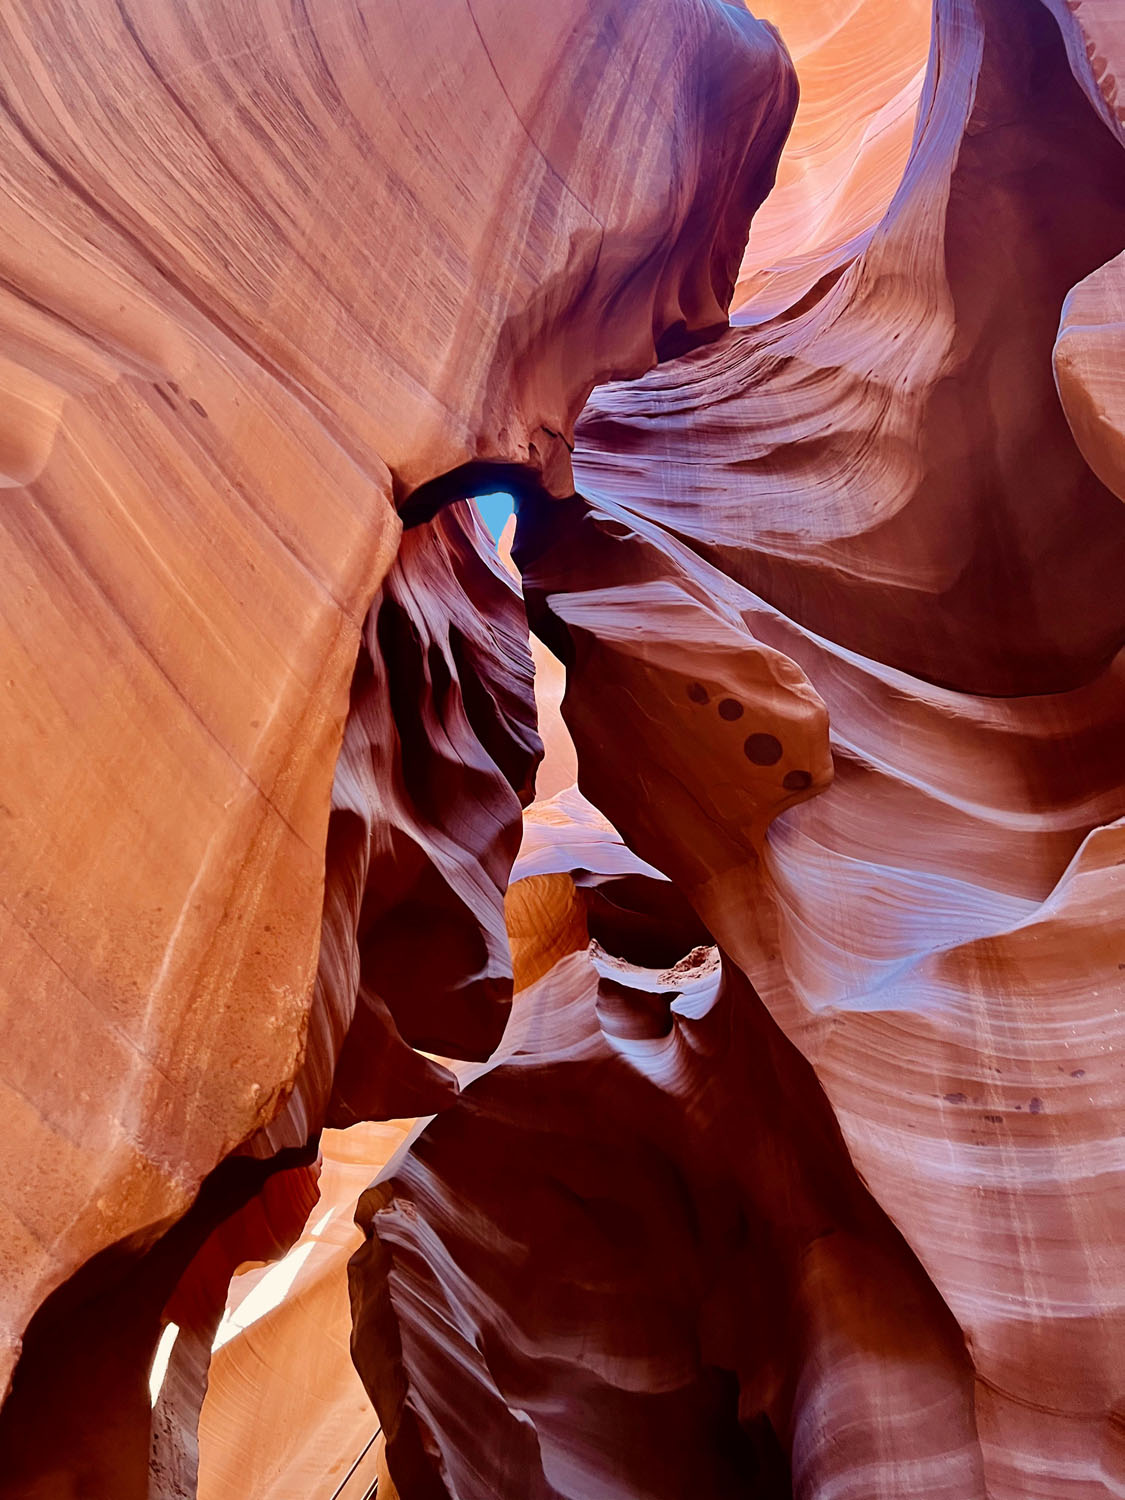 Photo by Jane Mottern  |  Exploring the beautiful red rocks of the Lower Antelope Canyon near Page is Arizona